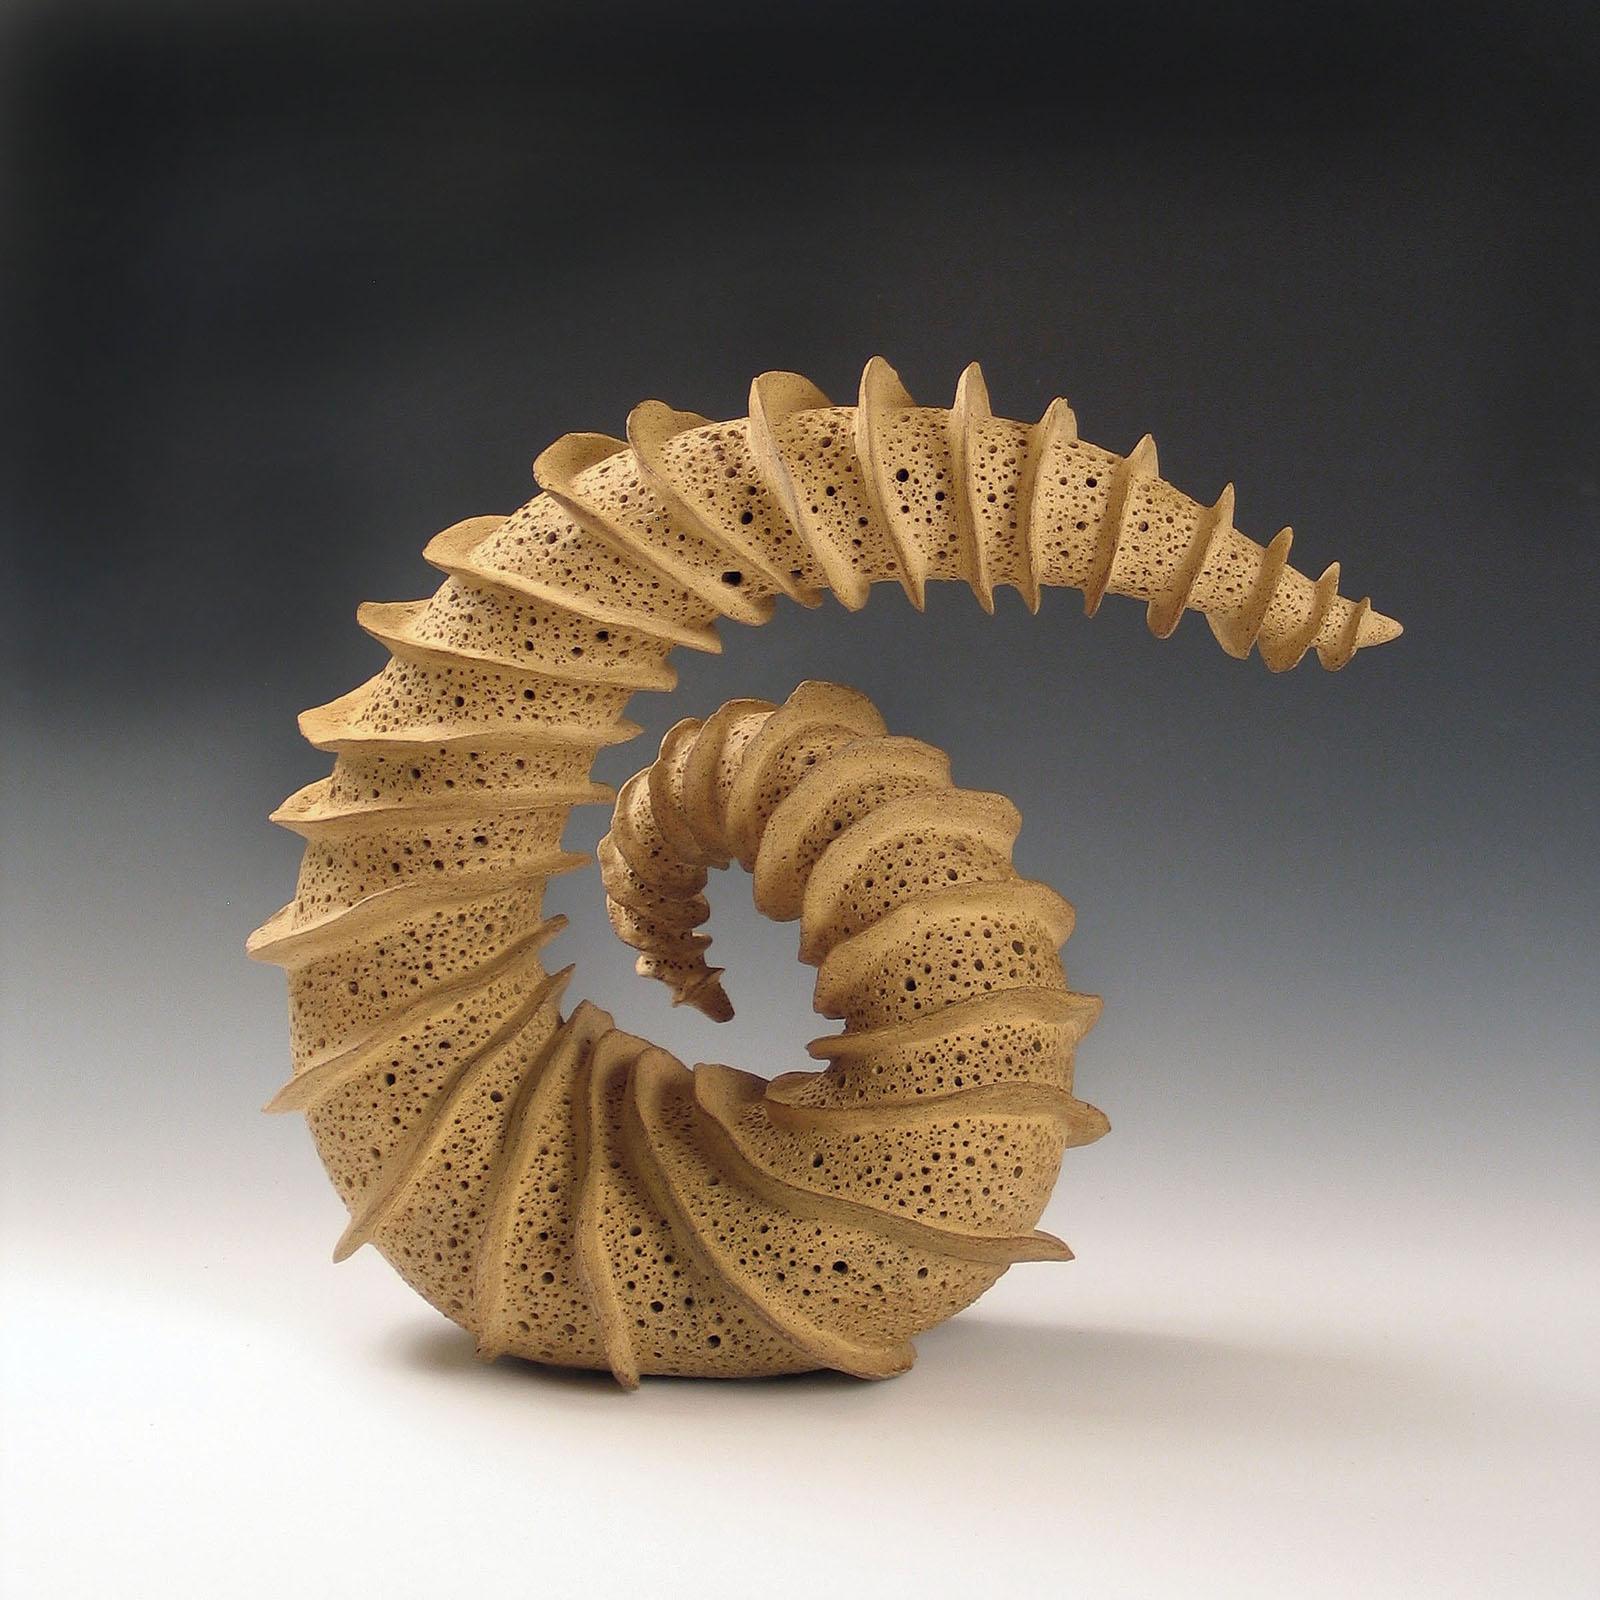 Elaine Lorenz Abstract Sculpture -  “Looking Back”,  radiates fins spiraling around a tapering coiled ceramic form